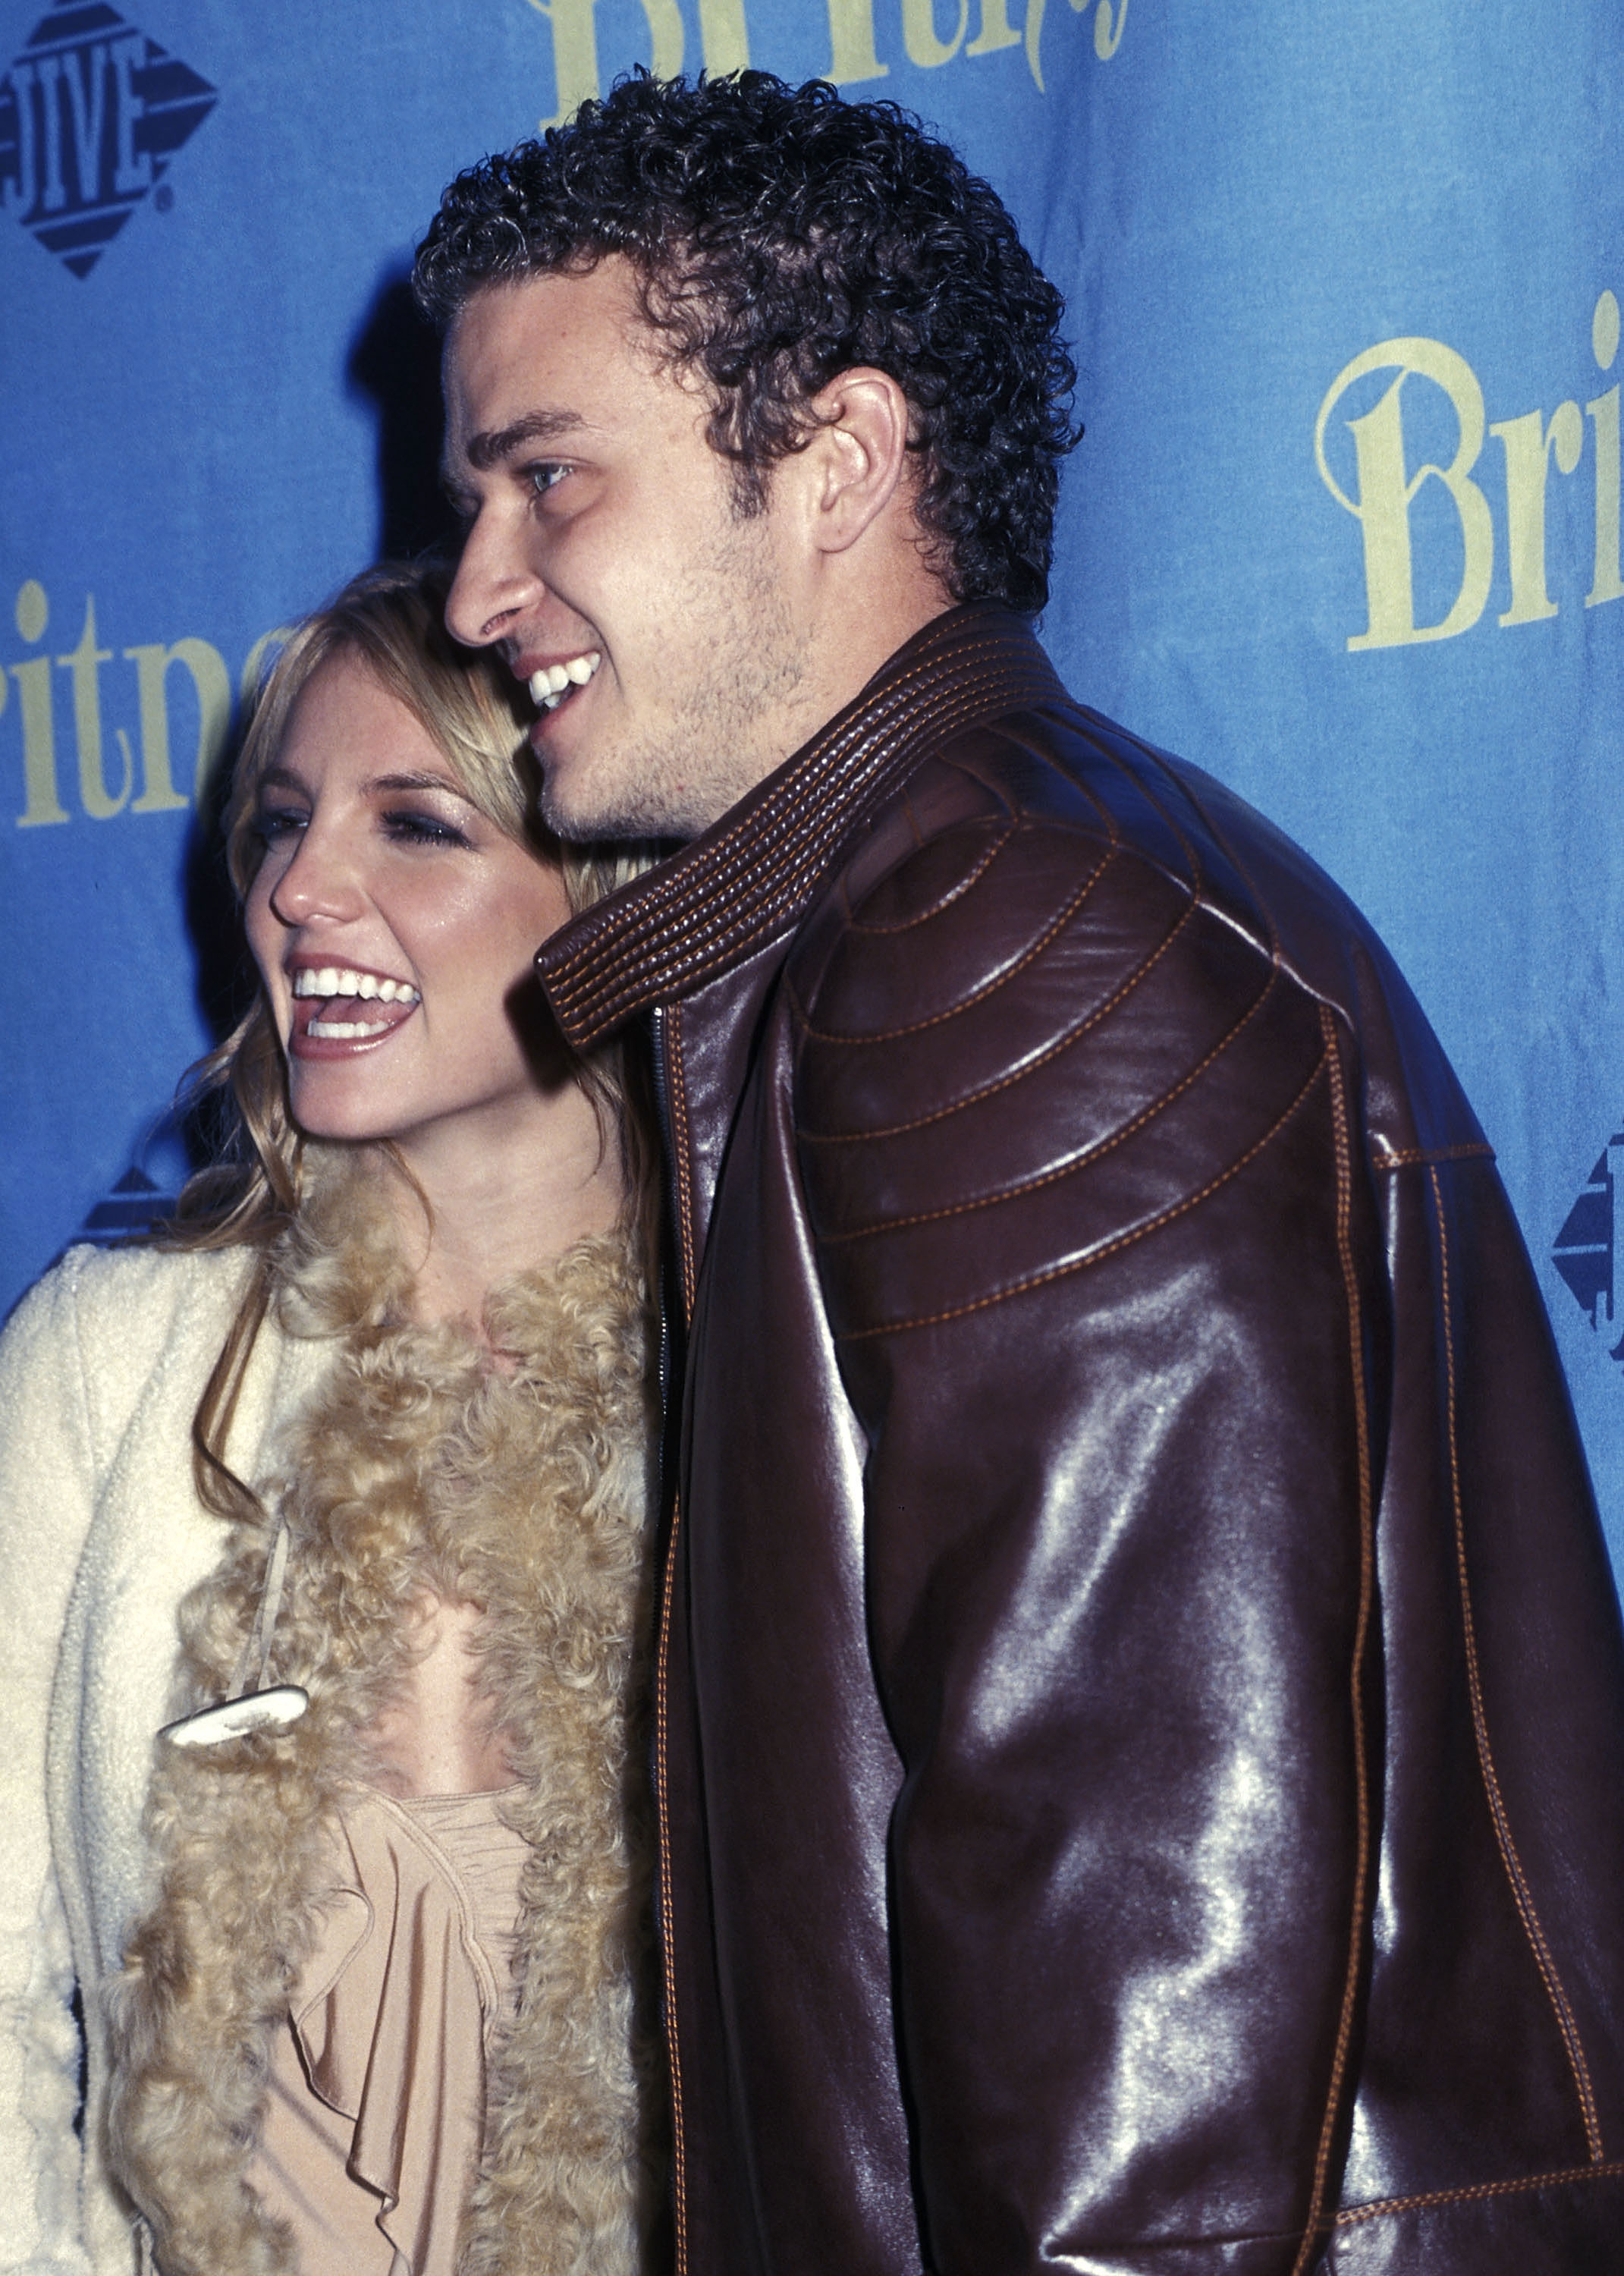 Closeup of Britney and Justin smiling for photographers on the red carpet